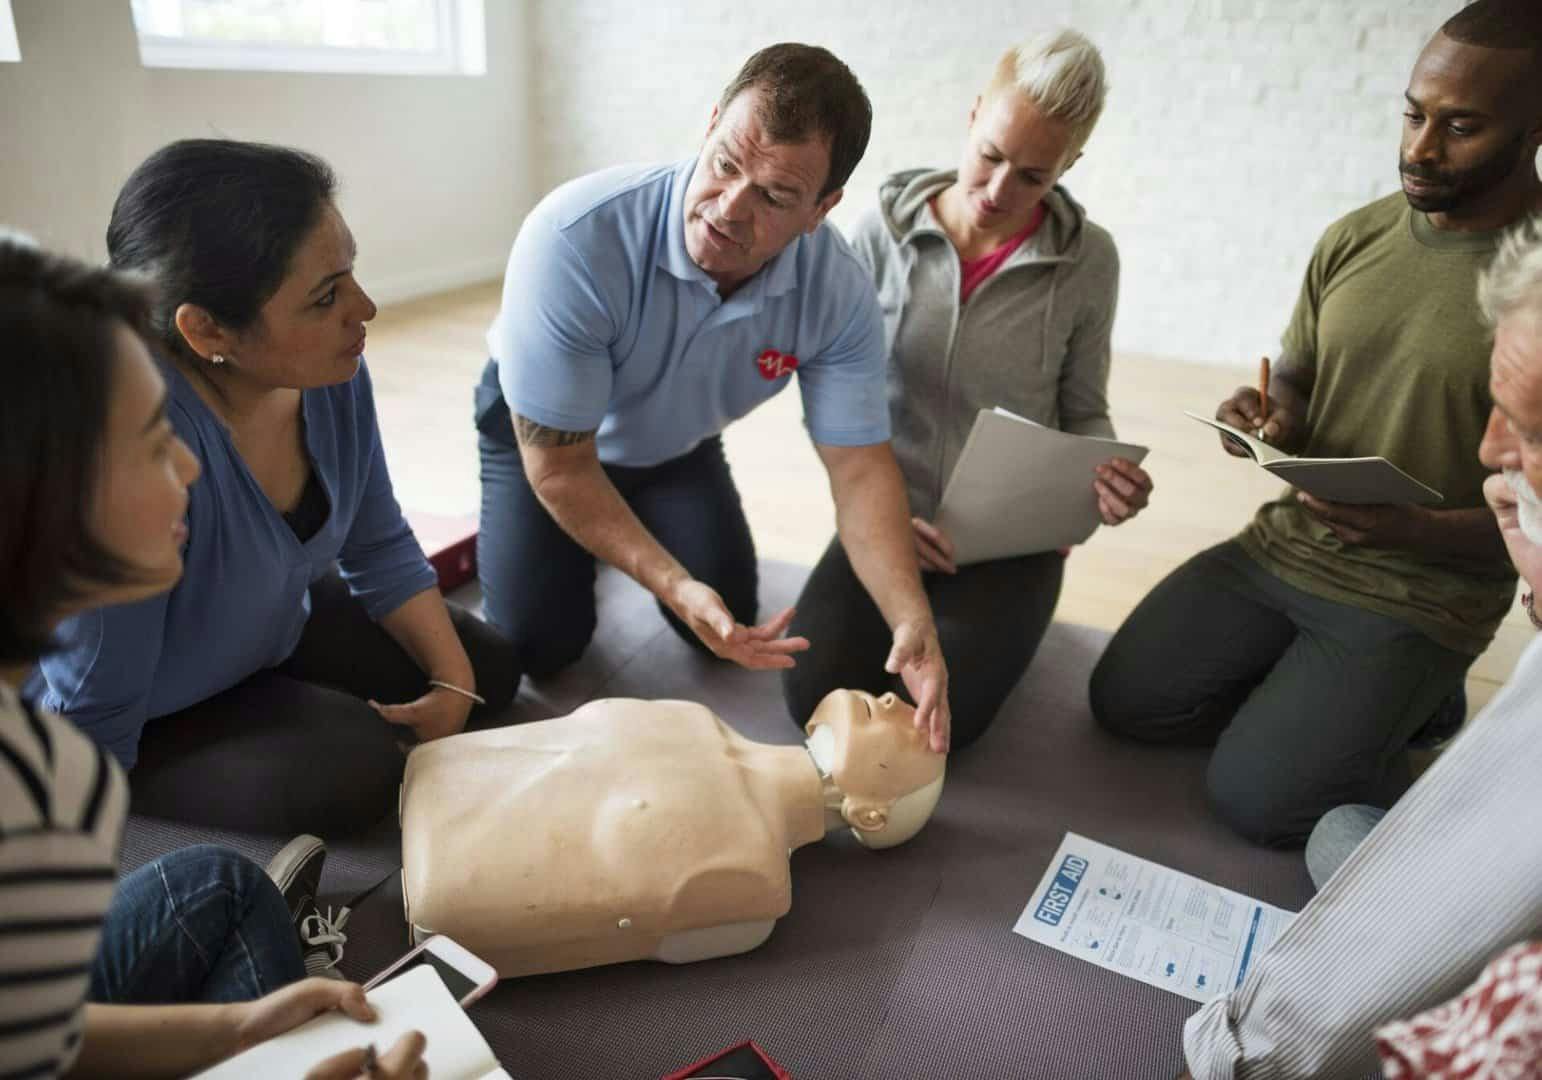 Top First Aid Skills Every Corporate Professional Should Have